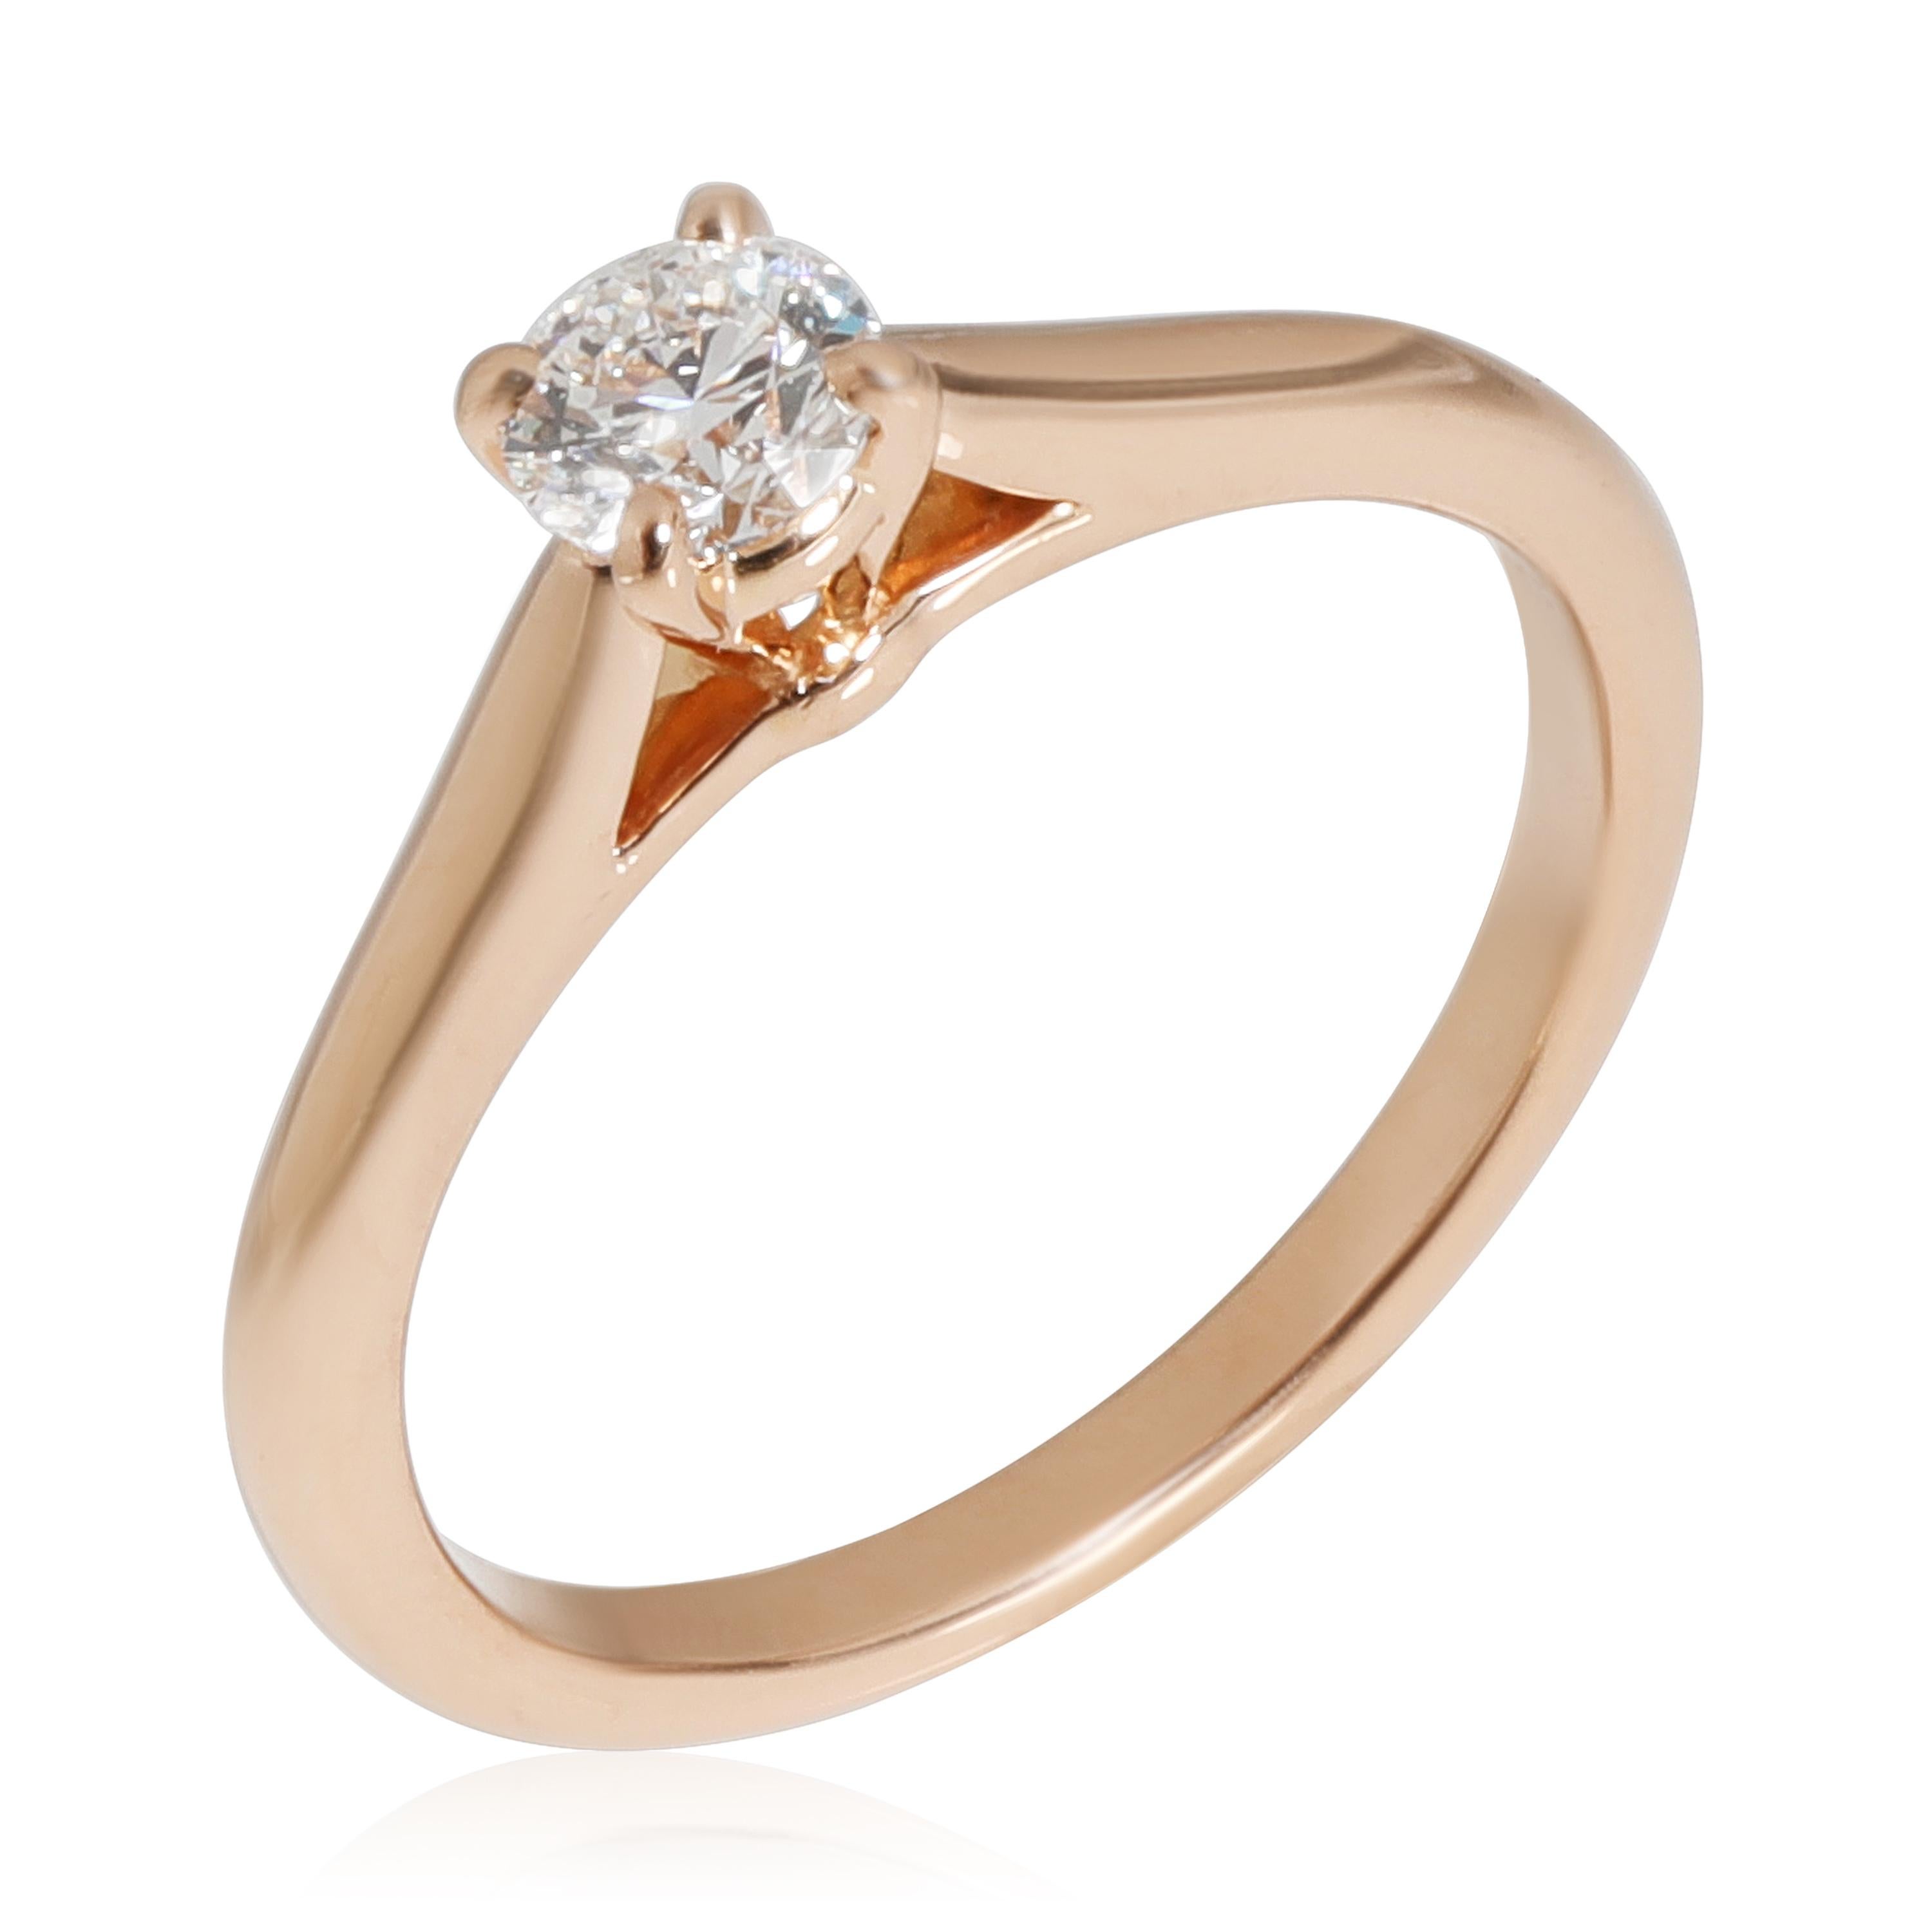 cartier solitaire 1895 engagement ring price